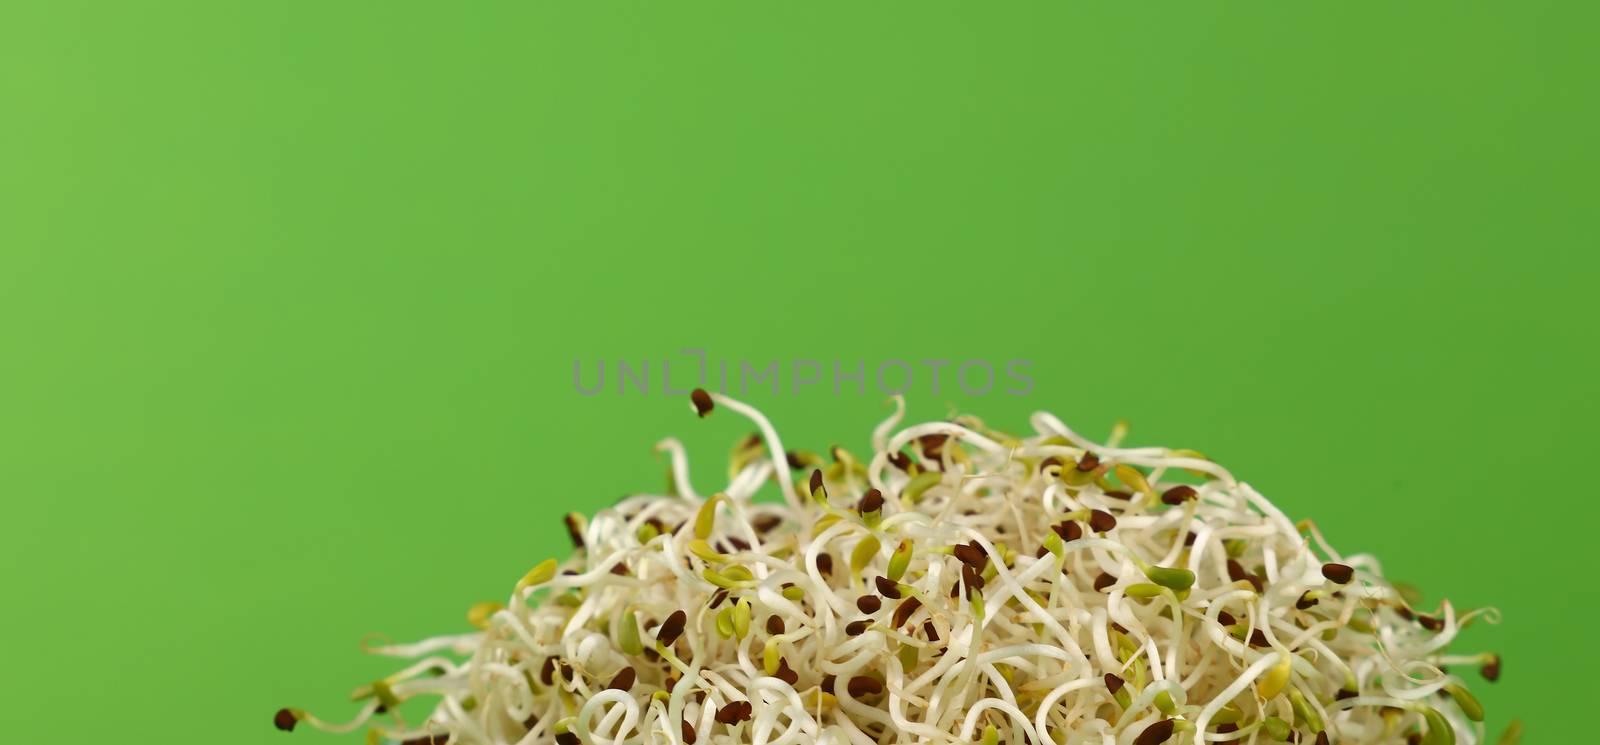 Microgreen leaves over green background by BreakingTheWalls